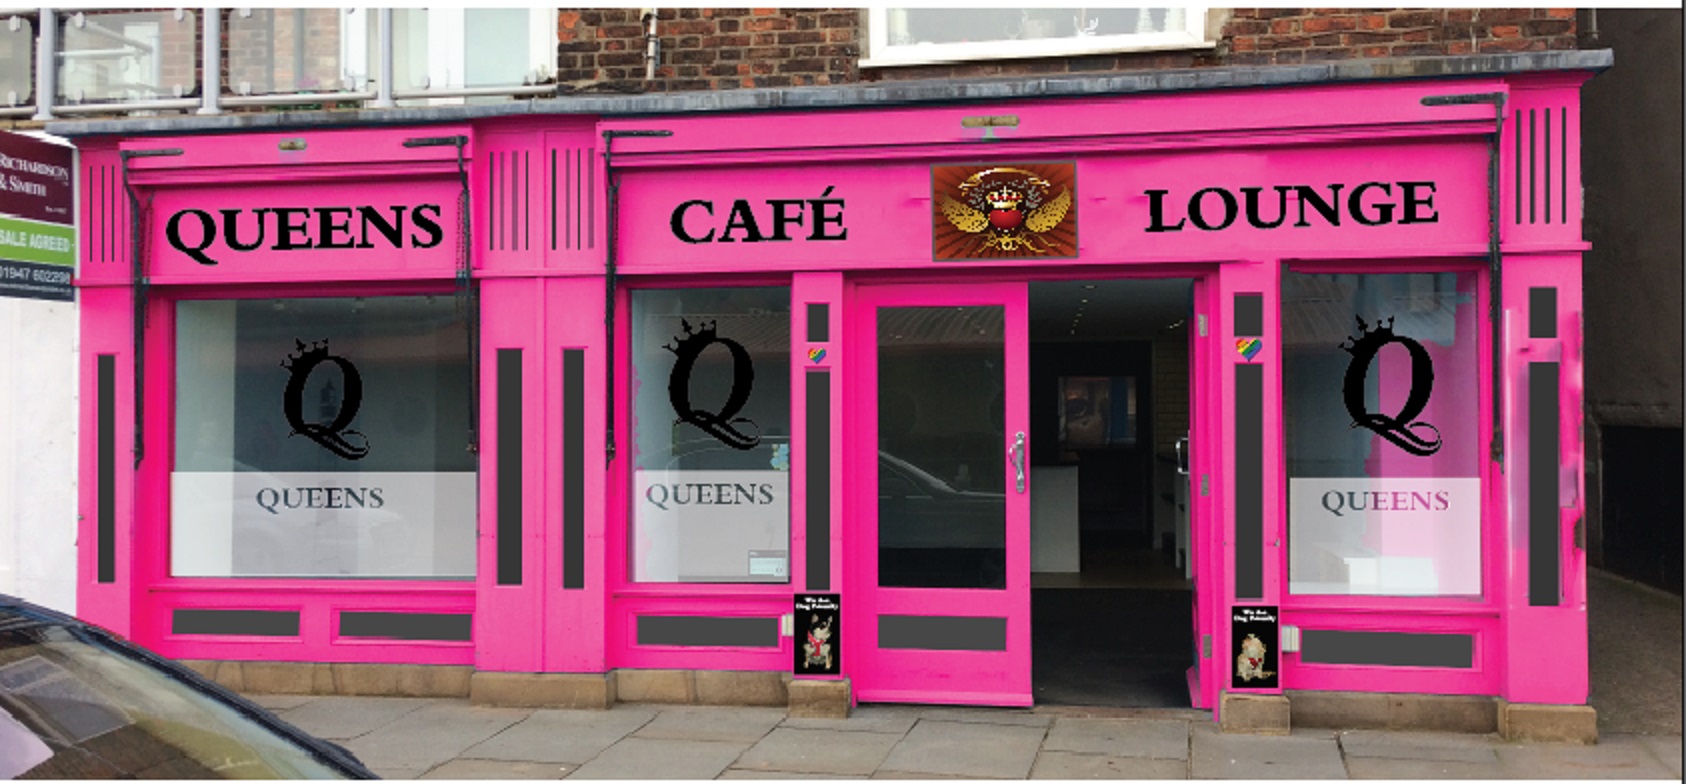 Queens Cafe Lounge